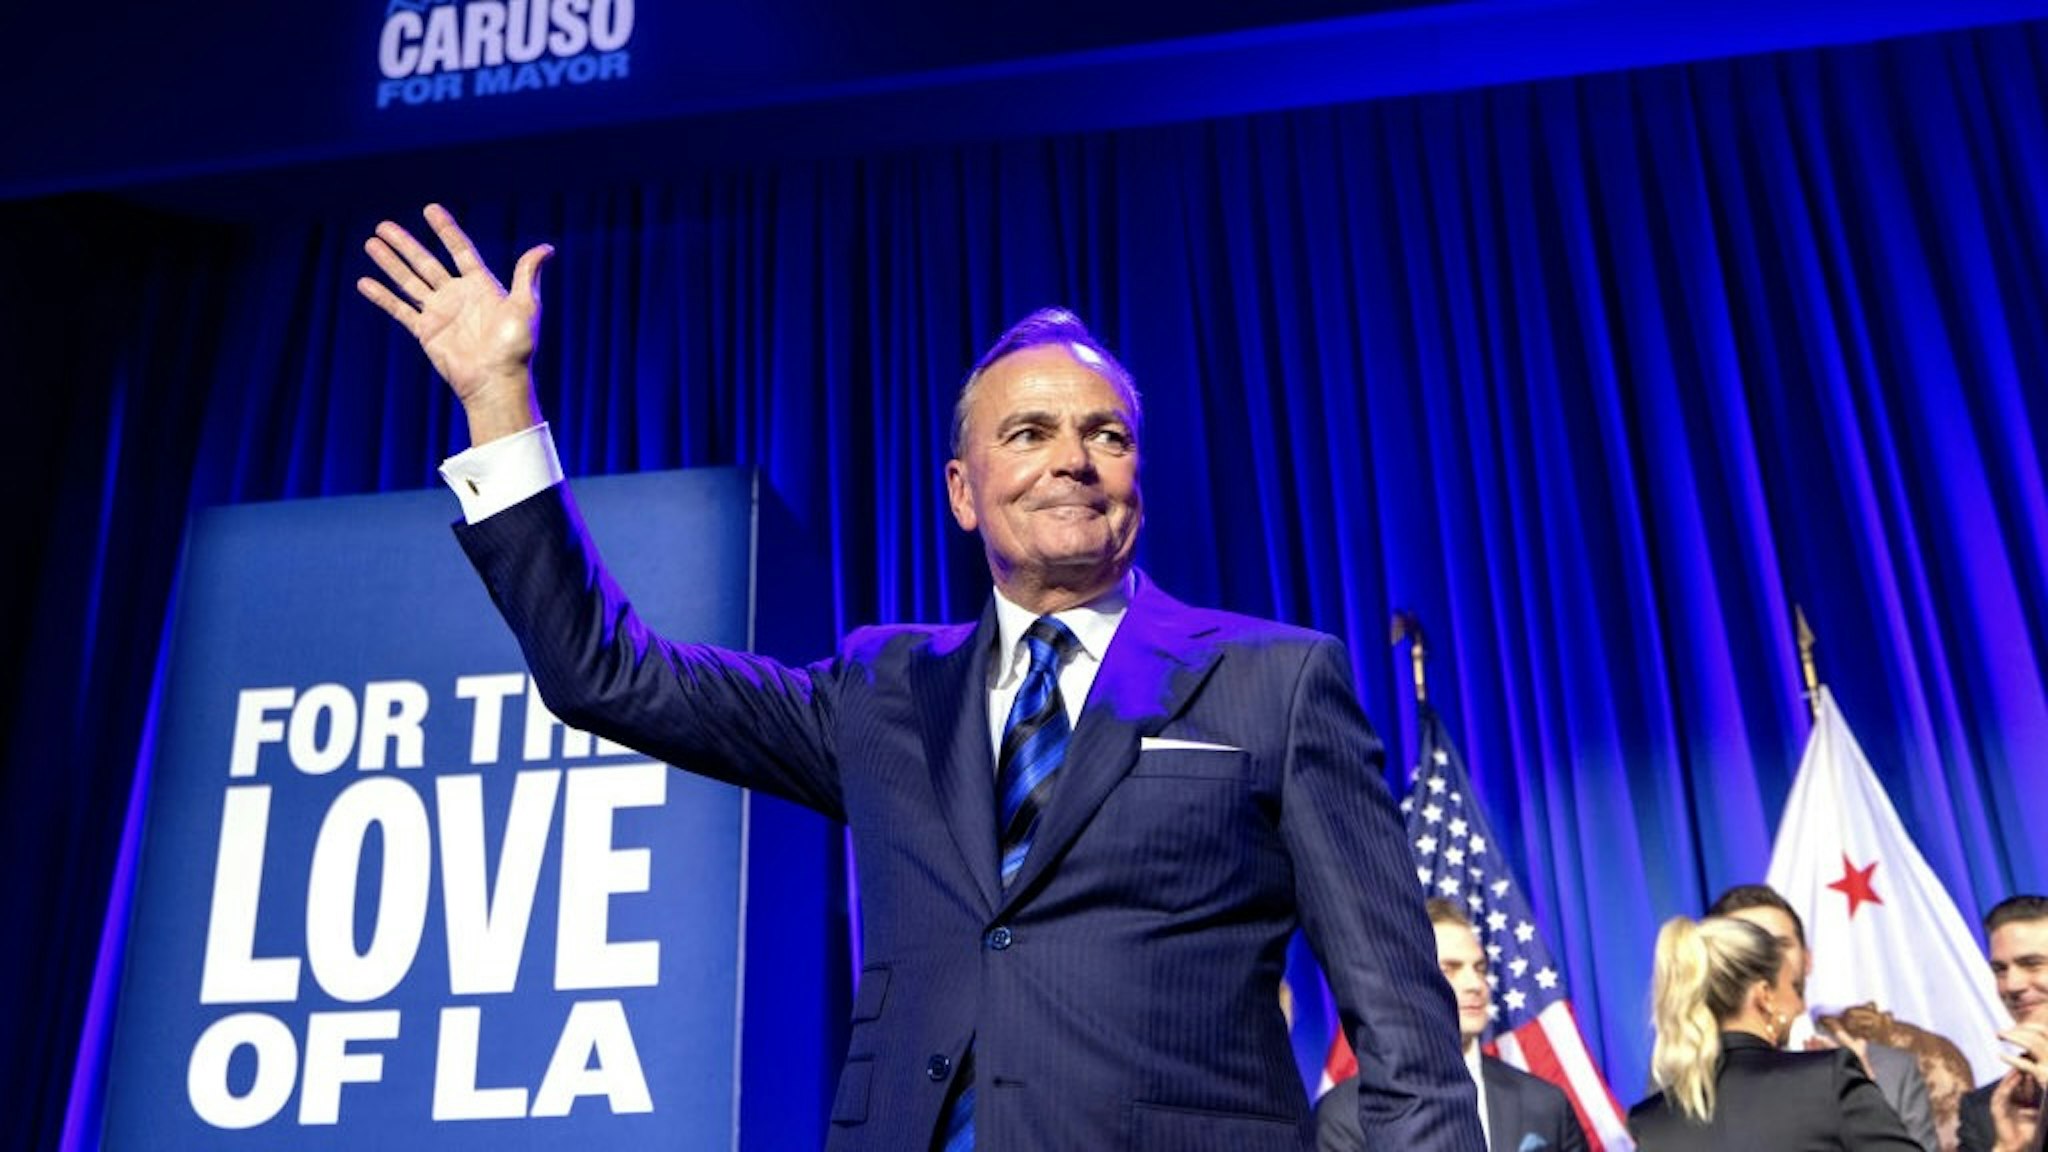 Los Angeles Mayoral Candidate Rick Caruso Holds Election Night Party LOS ANGELES, CA - NOVEMBER 08: Los Angeles mayoral candidate Rick Caruso arrives for an election night party on November 8, 2022 in Los Angeles, California. Caruso is in a tight race against U.S. Rep. Karen Bass (D-CA). (Photo by David McNew/Getty Images) David McNew / Stringer